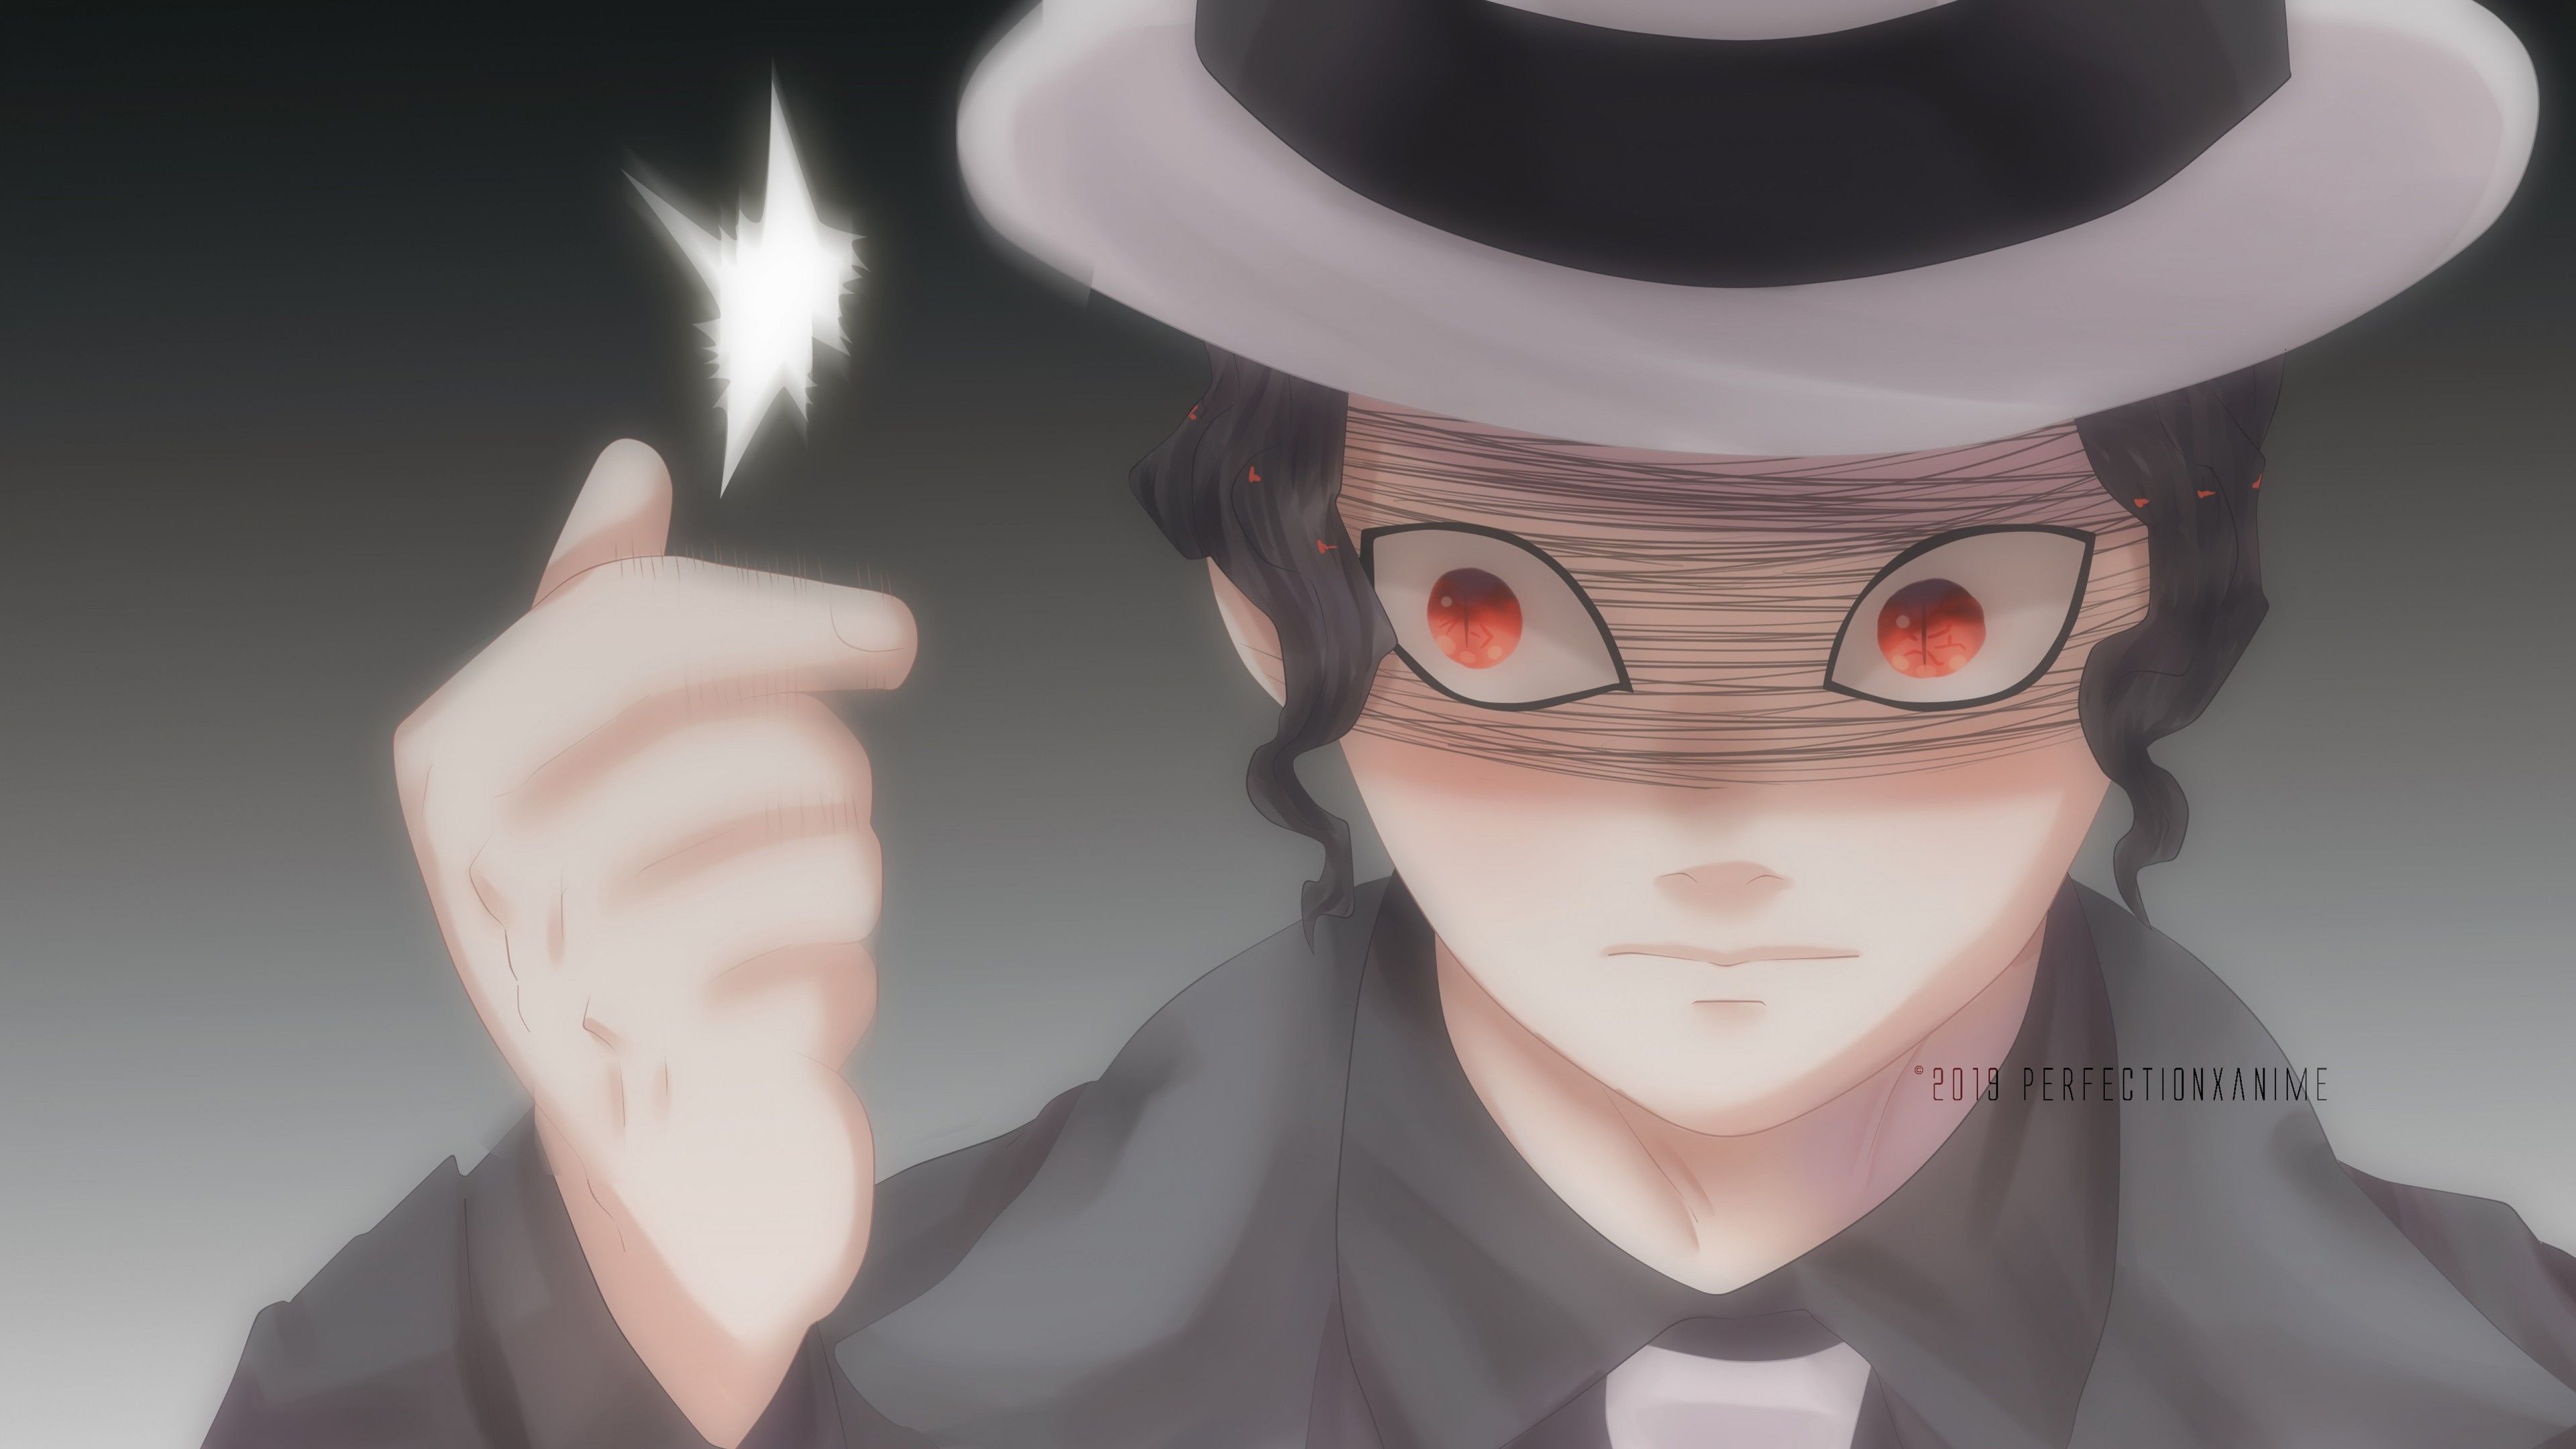 Demon Slayer Muzan Kibutsuji With Red Eyes And Hat With Backgrounds Of Blac...